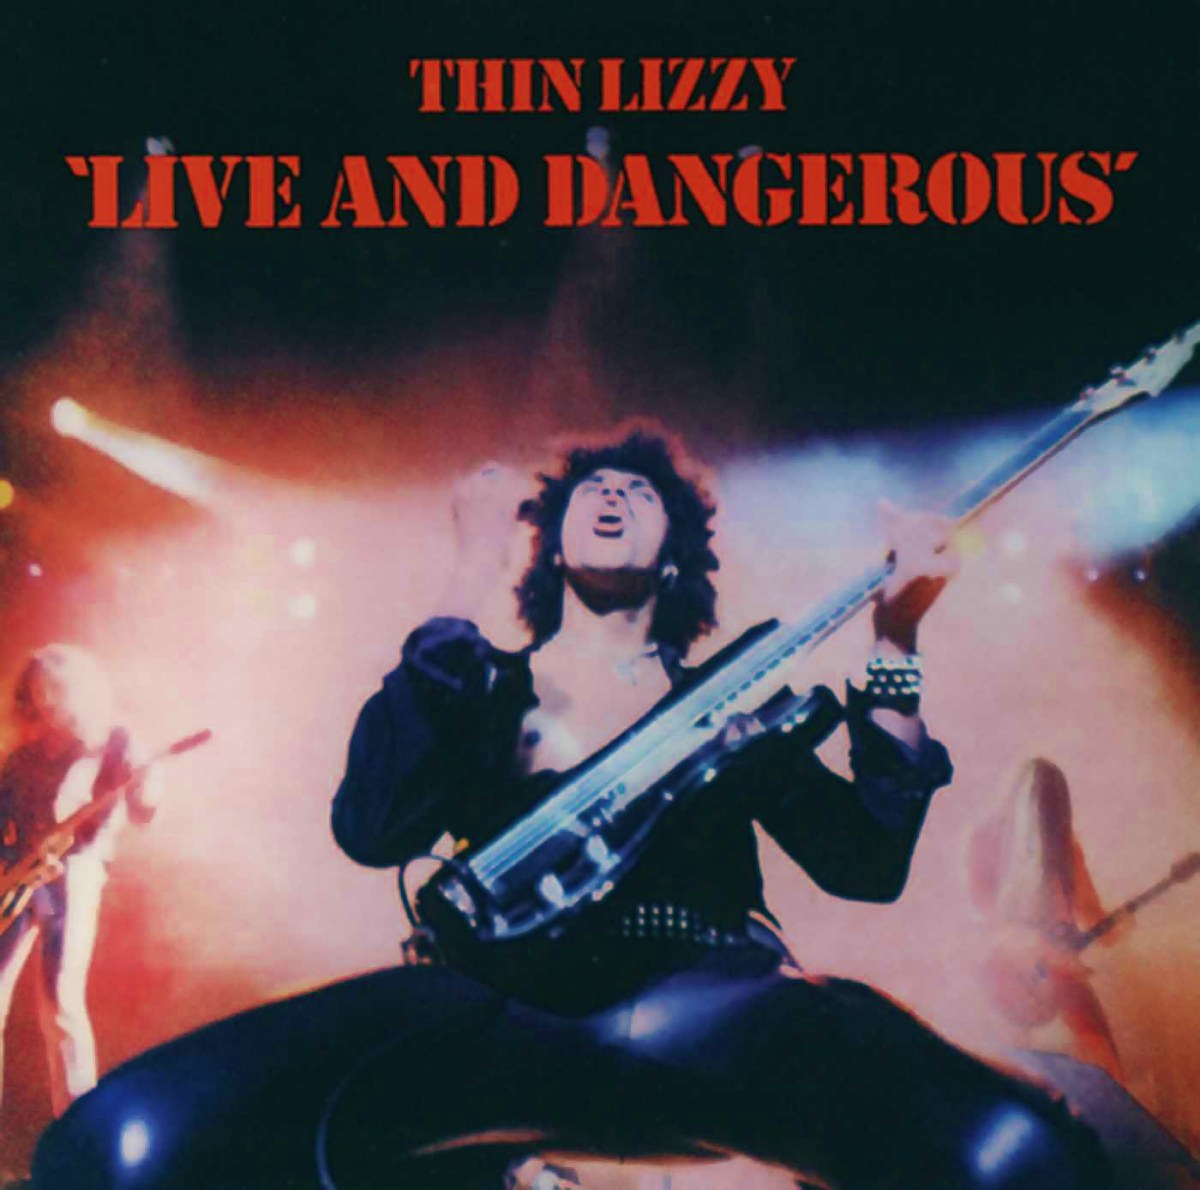 Thin Lizzy - Live And Dangerous (1978)